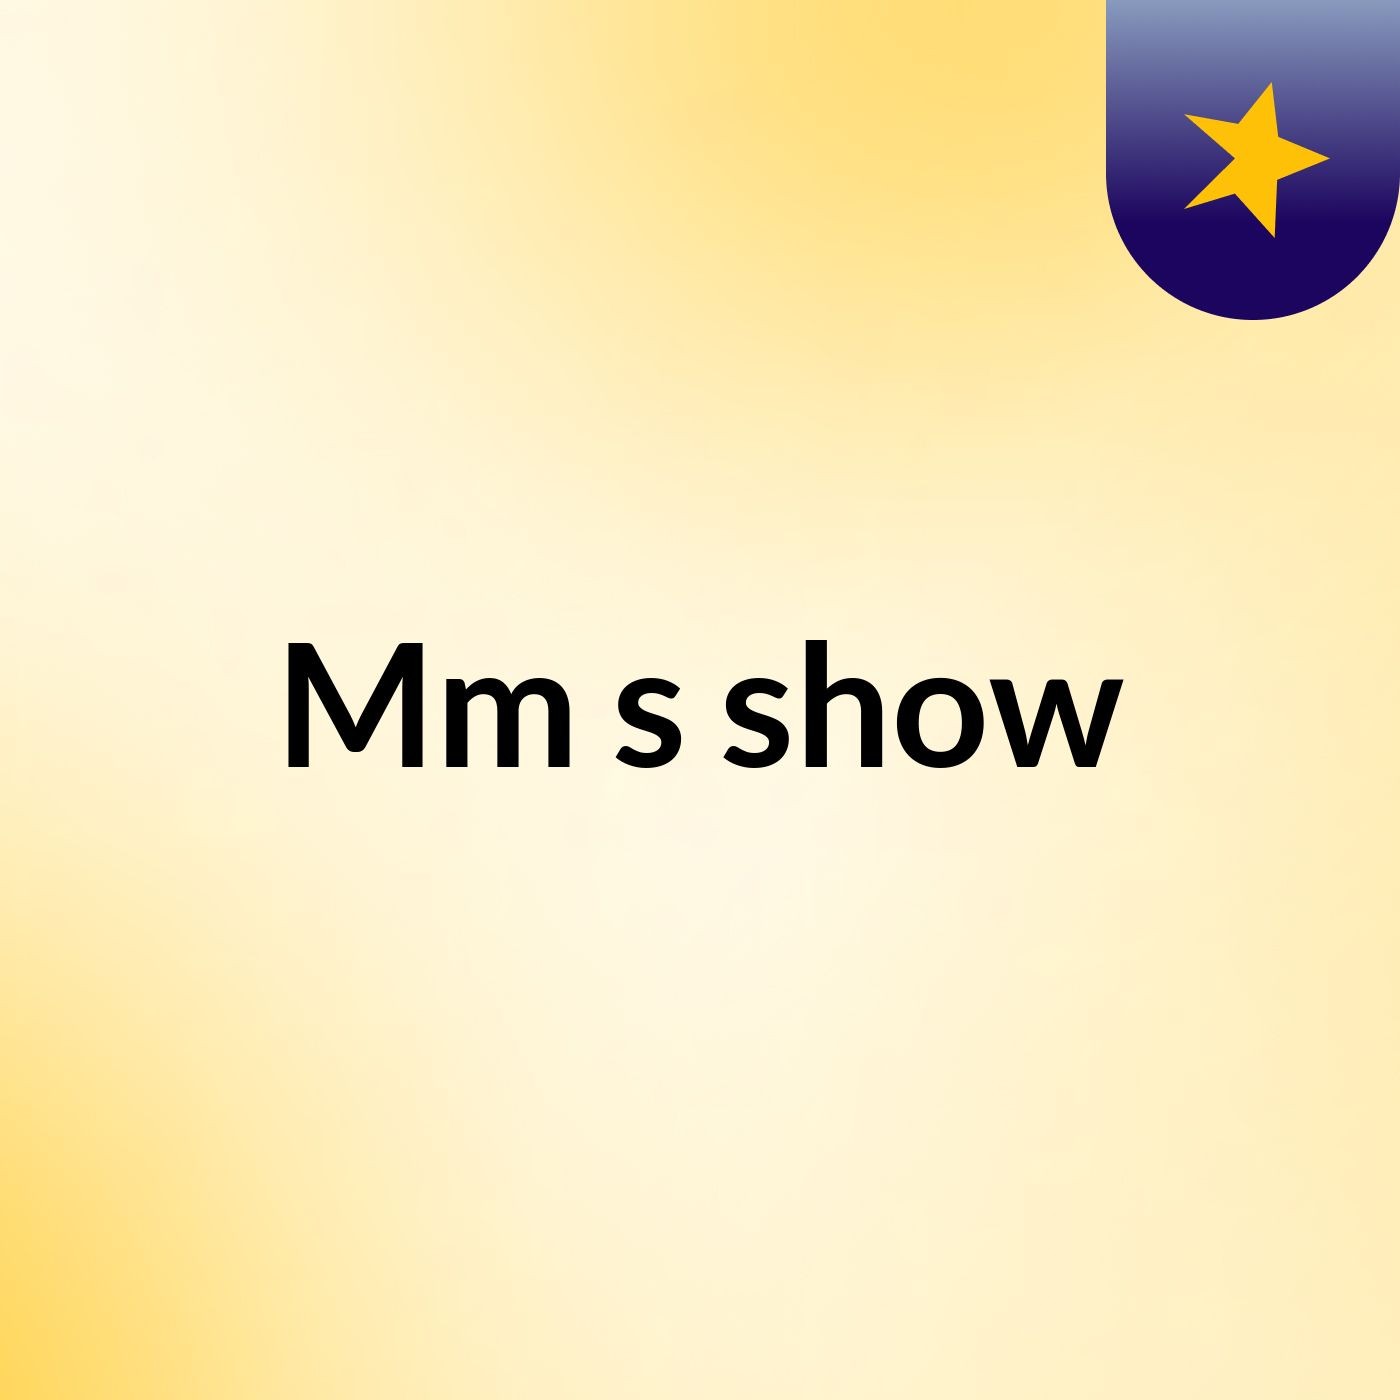 Mm's show